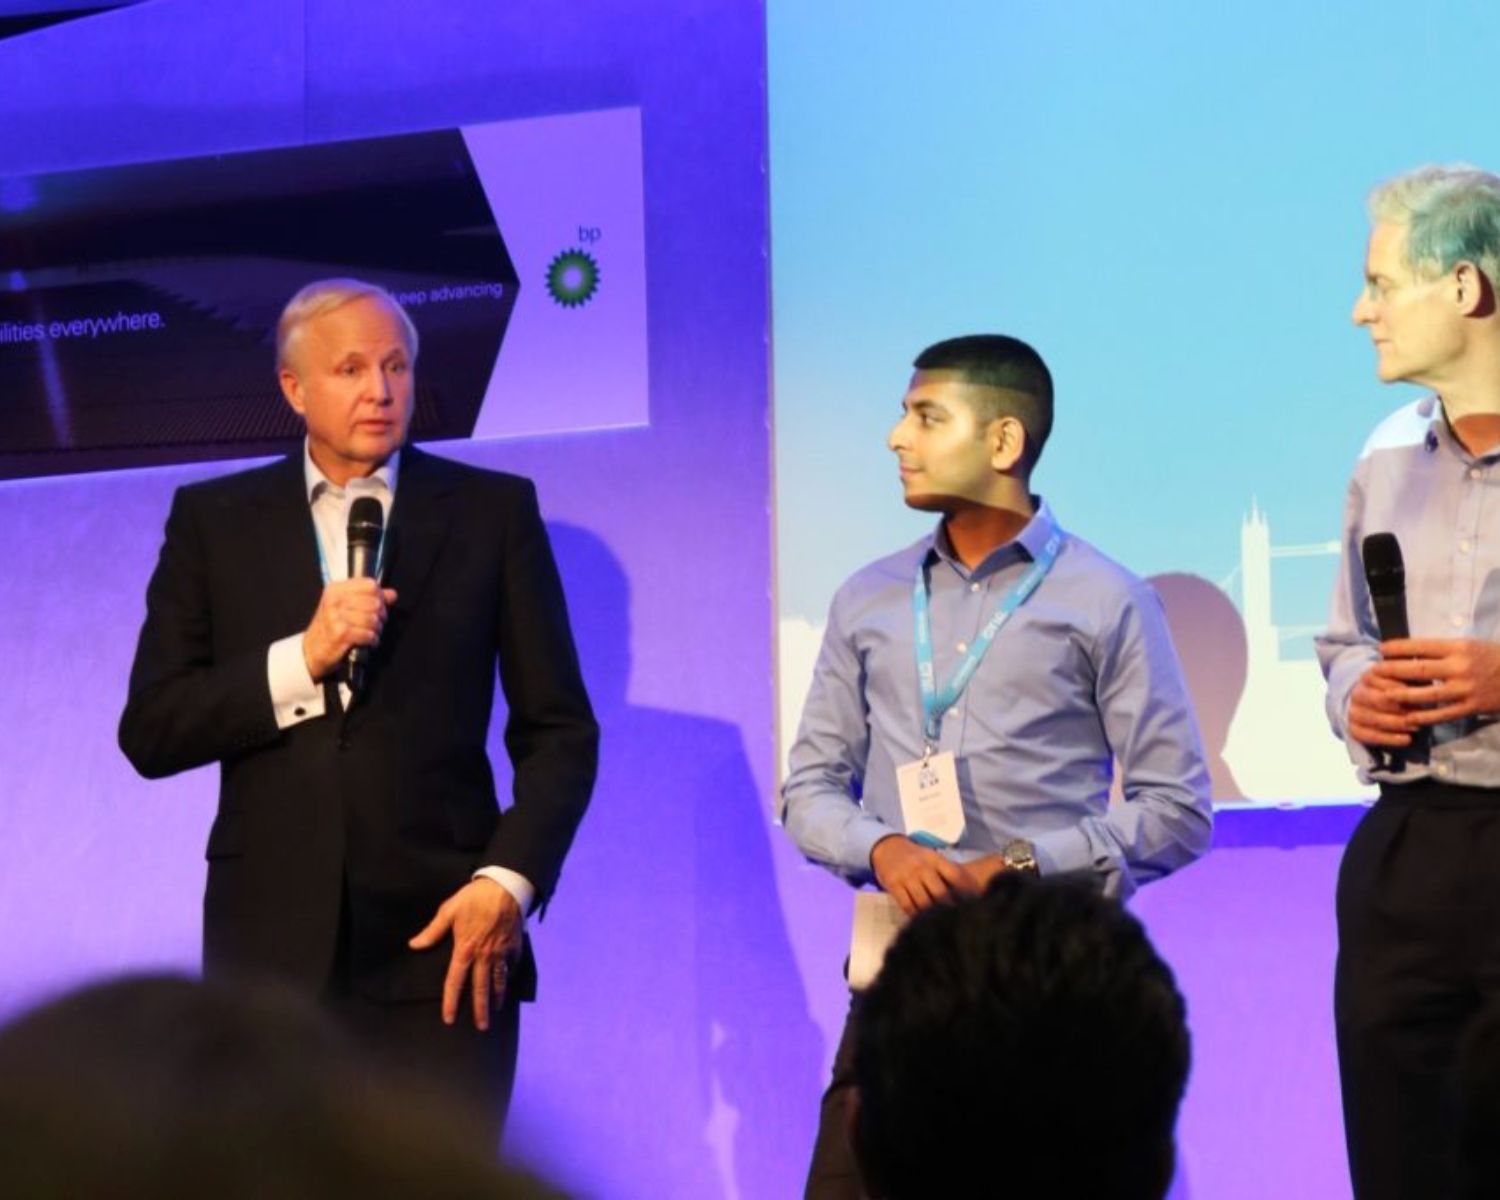 Bob Dudley, CEO of BP, and Spender Dale, chief economist, answer questions at the One Young World Summit.